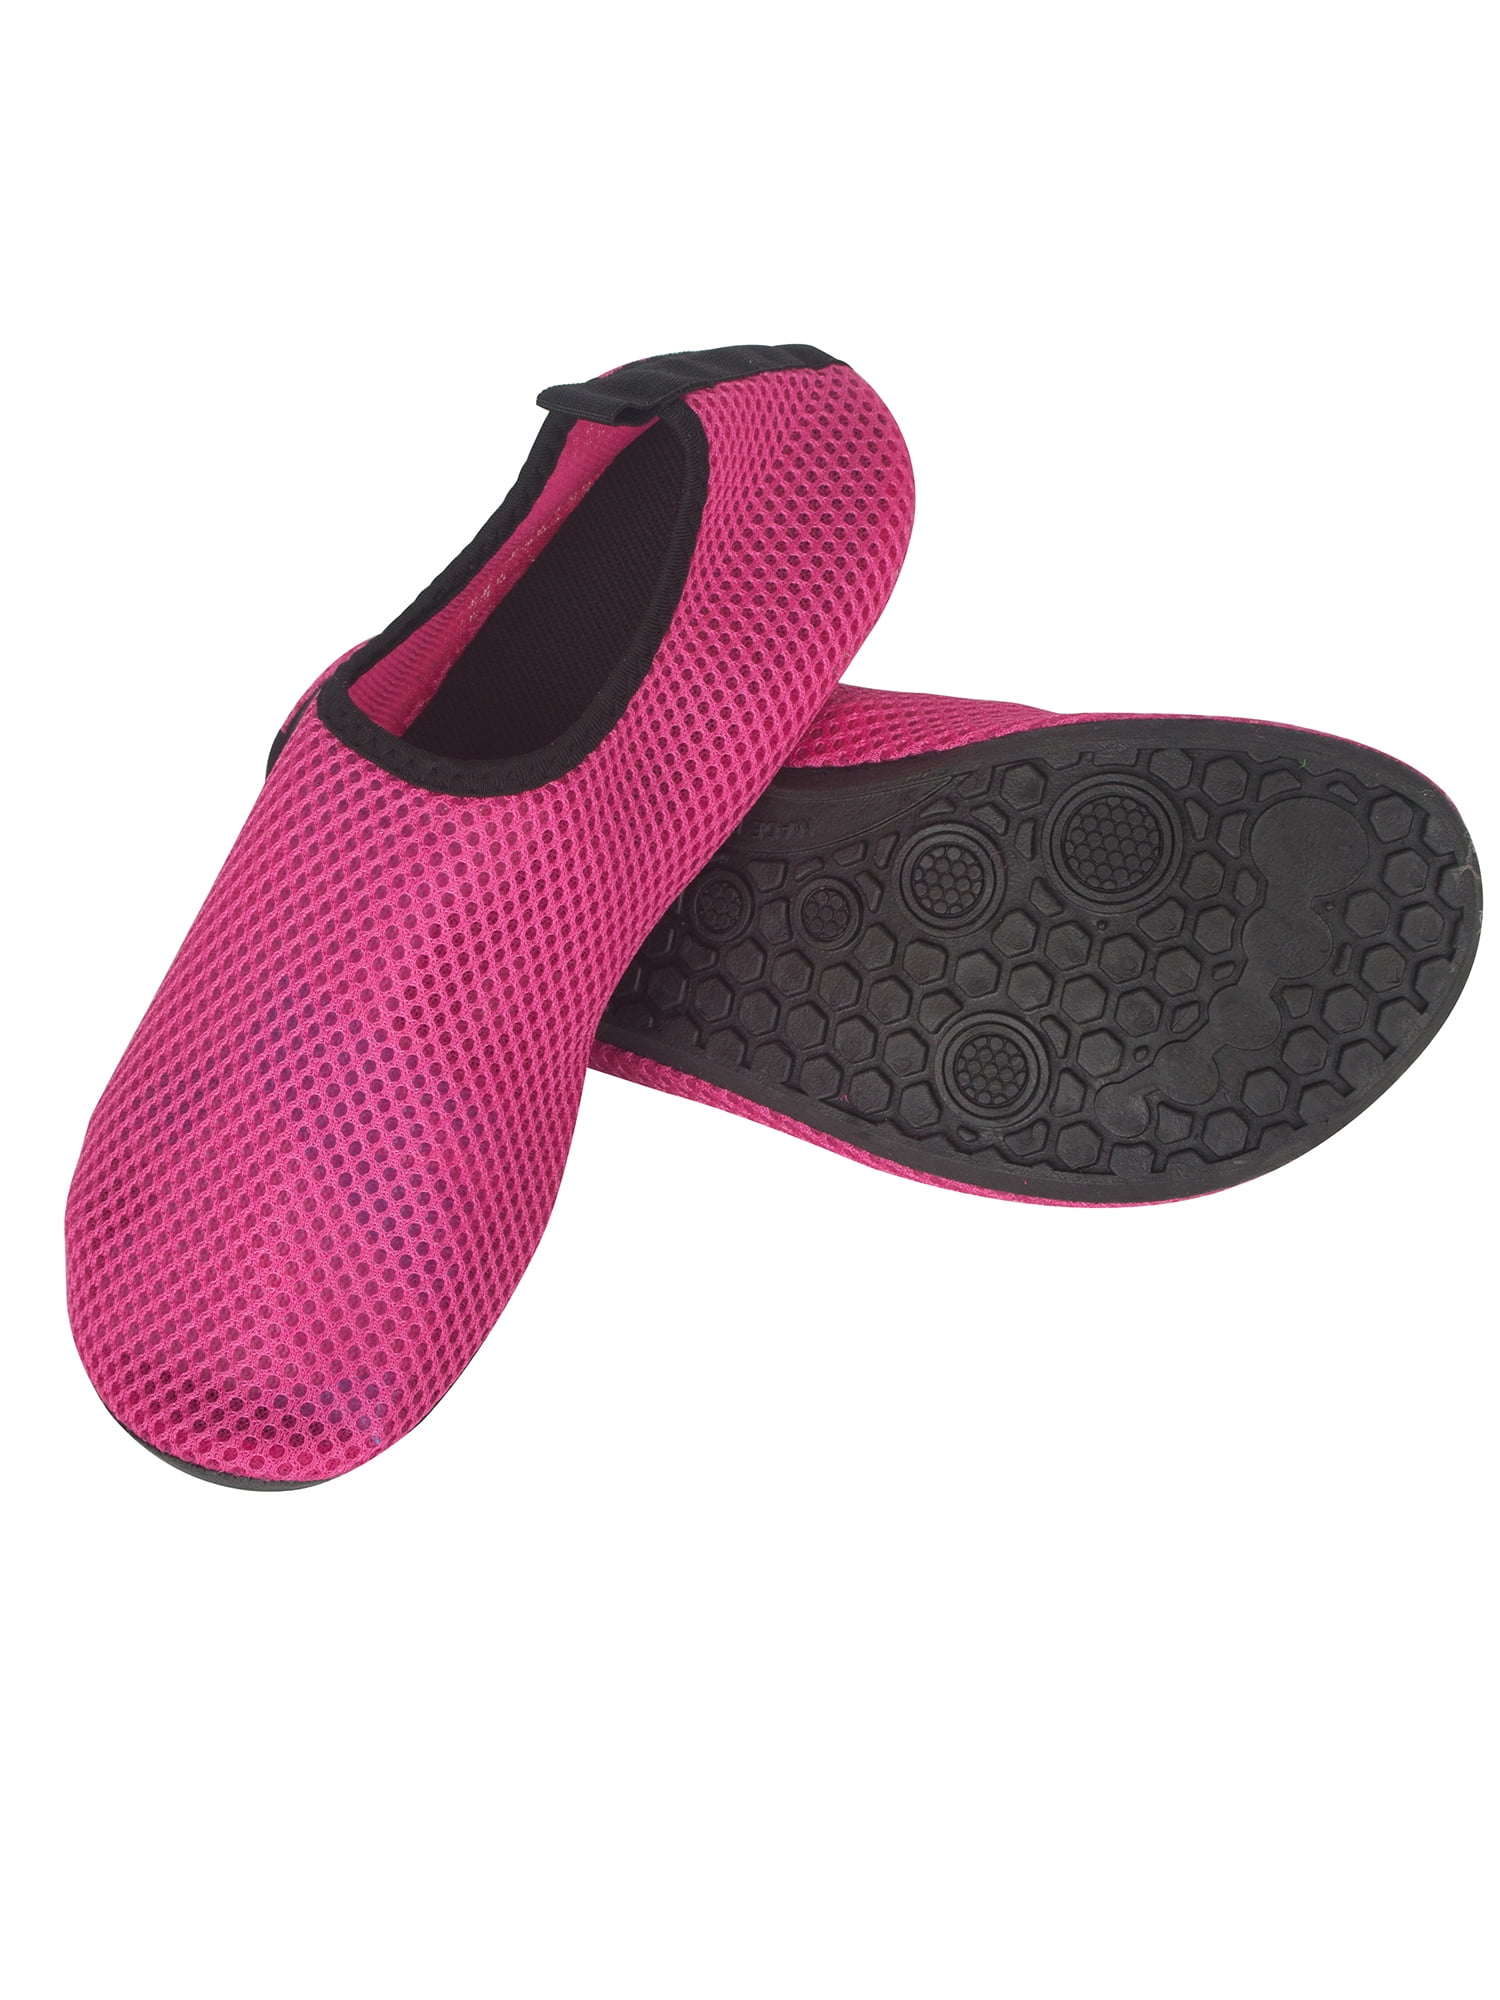 Details about   Women/Men Slide-Proof Quick-Dry Water Shoes Beach Walking Surfing Snorkeling USA 